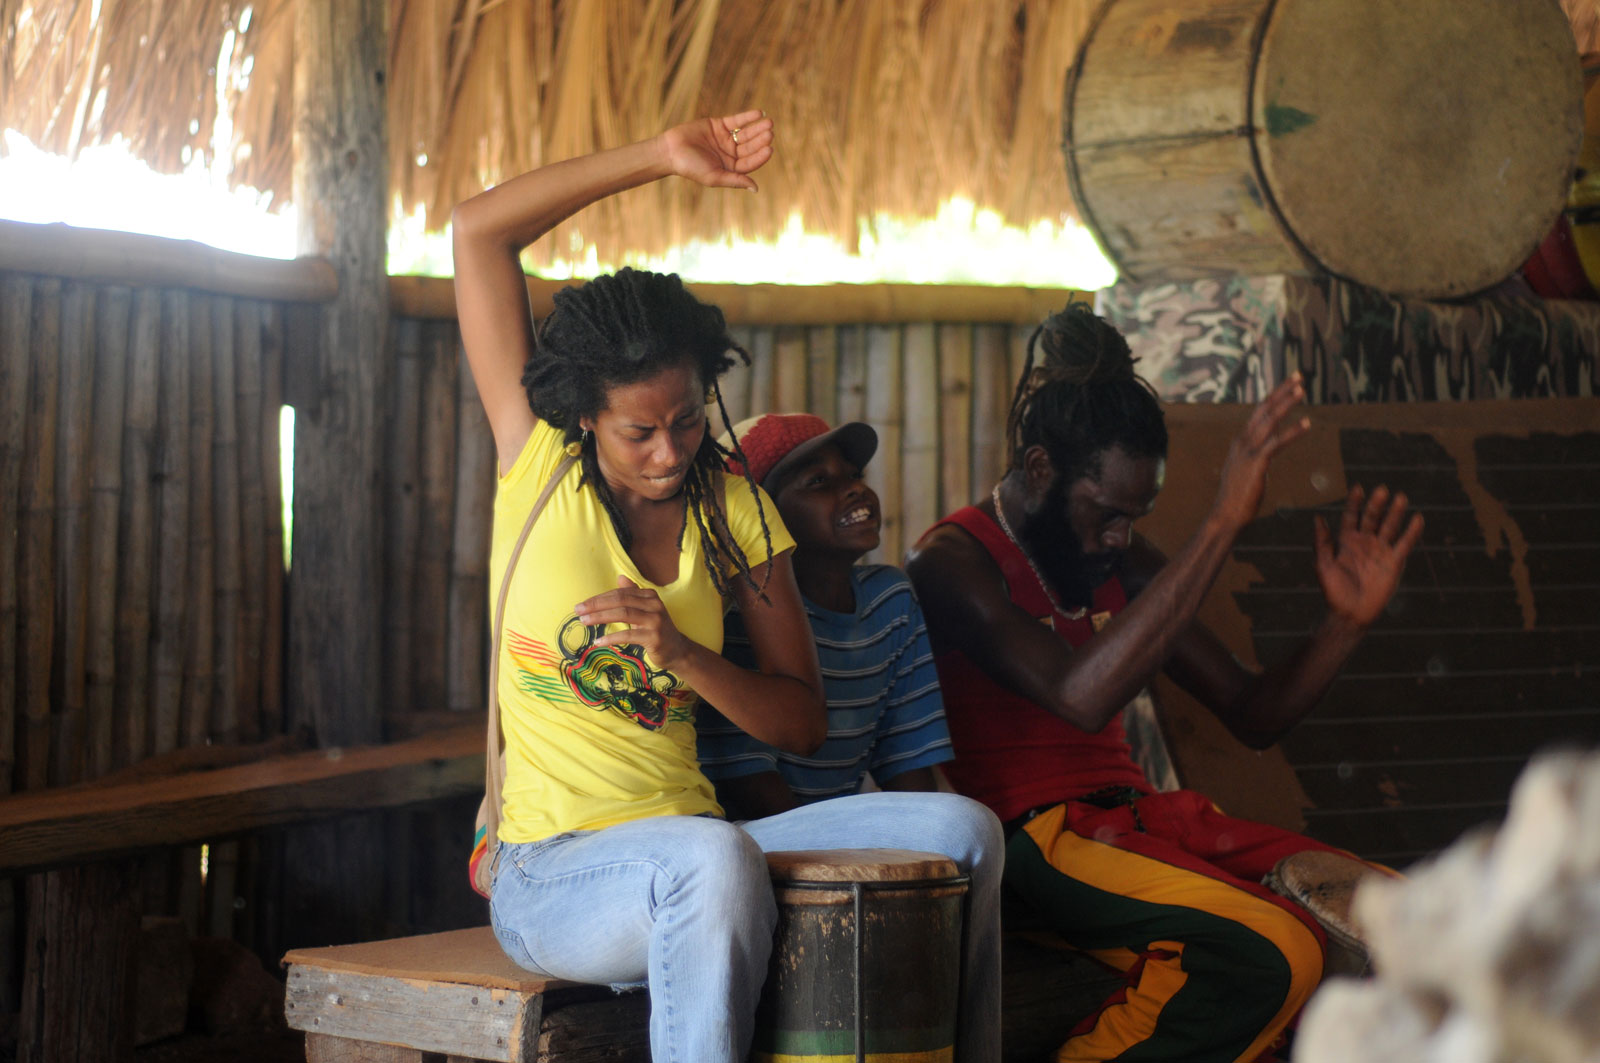 Donisha Prendergast and others drumming in the style of Kumina, the Afro-Jamaican religion that Howell incorporated into Rastafari practice, at Pinnacle, St. Catherine, Jamaica, circa 2010